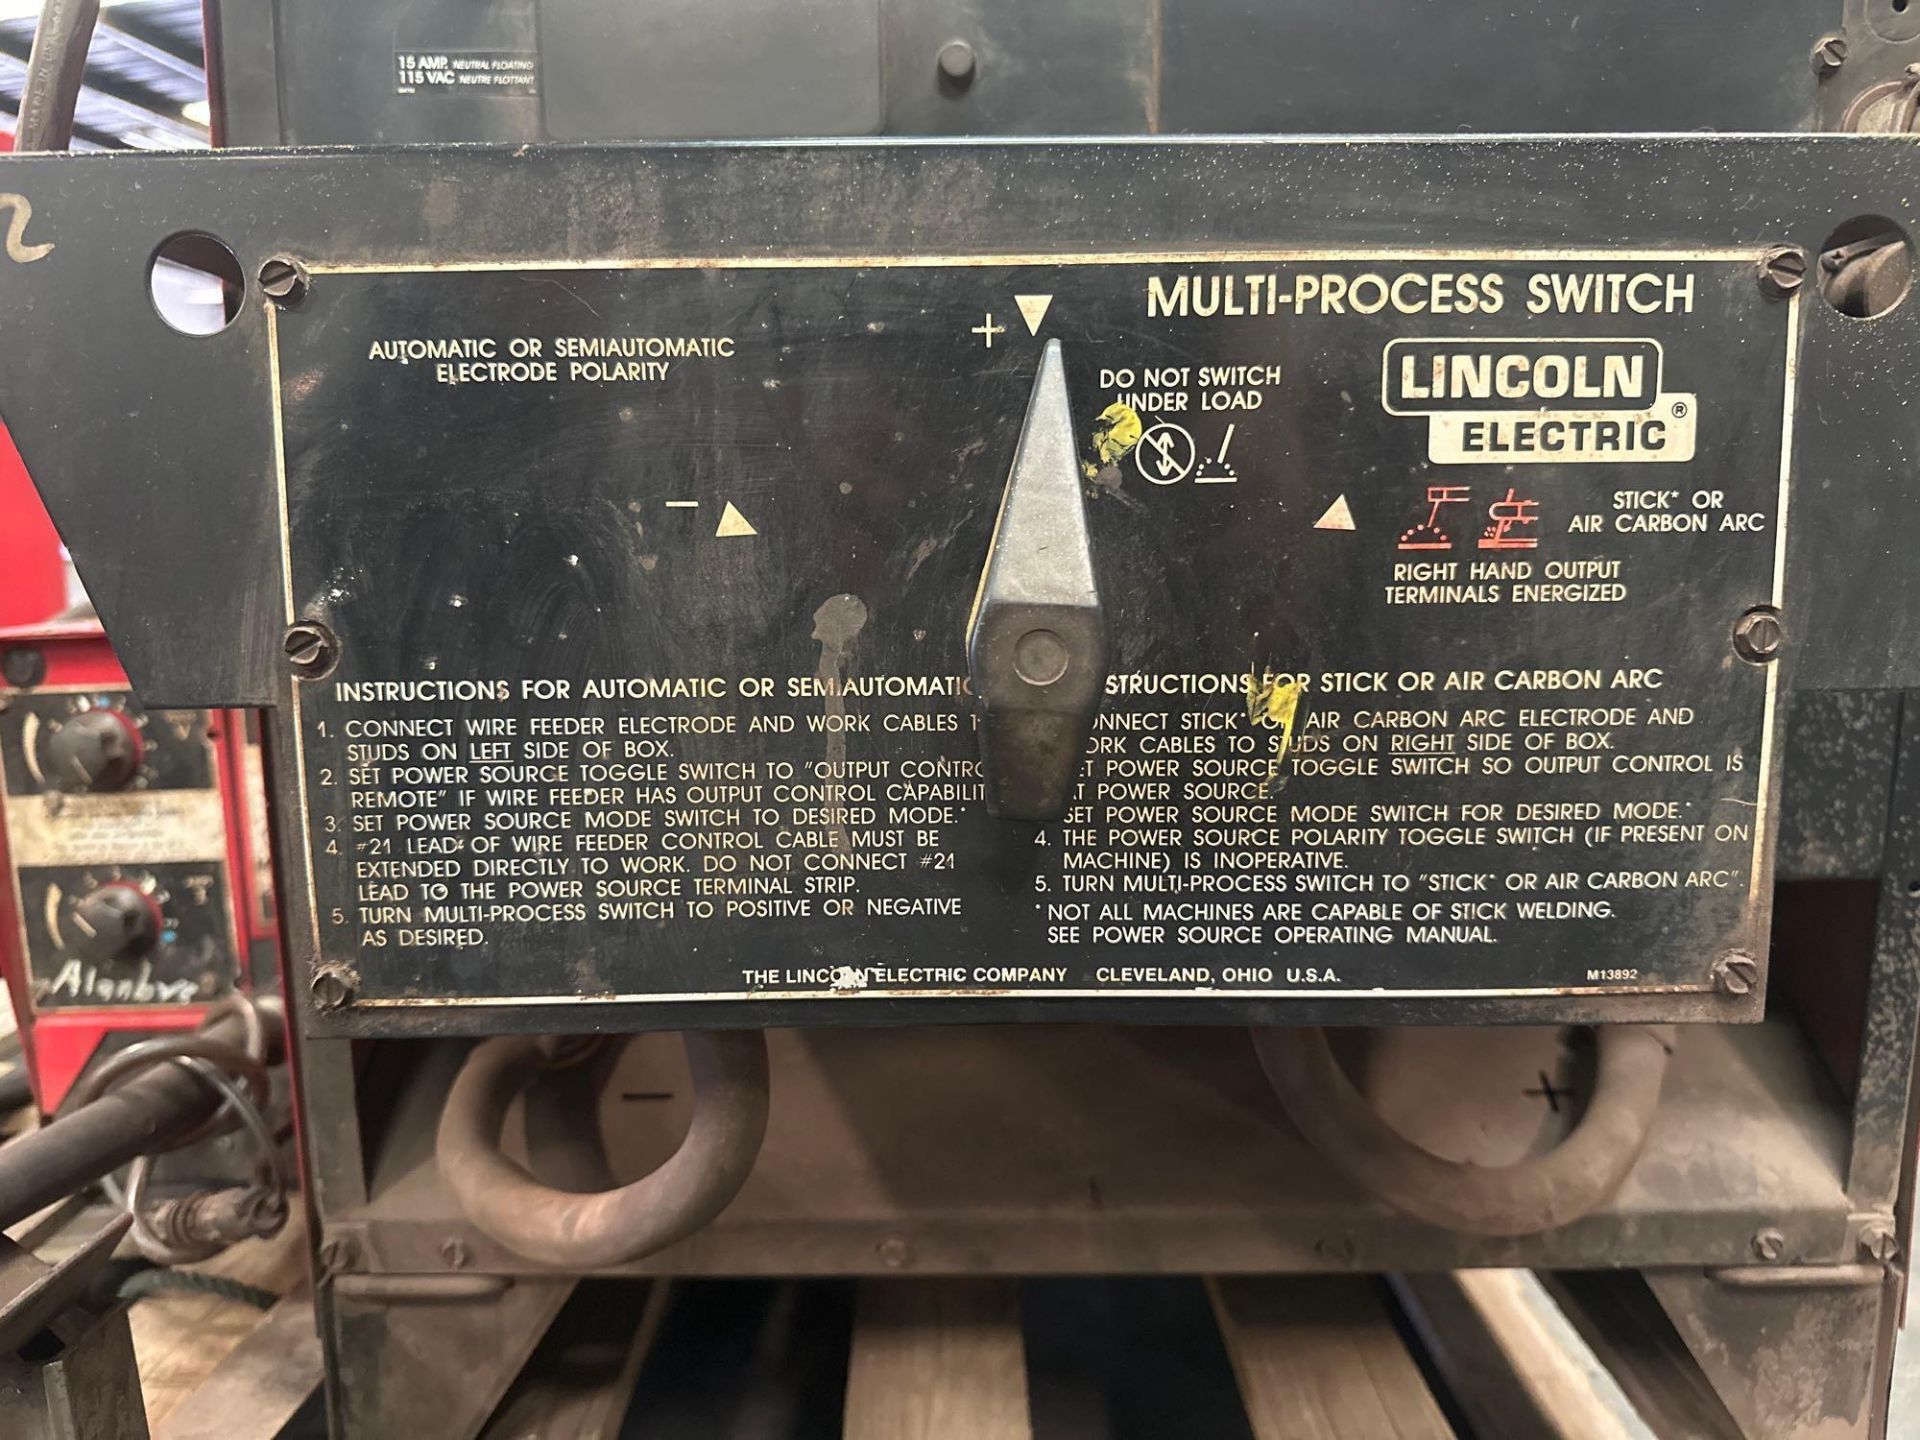 Lincoln Electric DC-600Welder, s/n U 1020461387 w/ Lincoln Squirt Welder LN-8Wire Feeder - Image 2 of 10